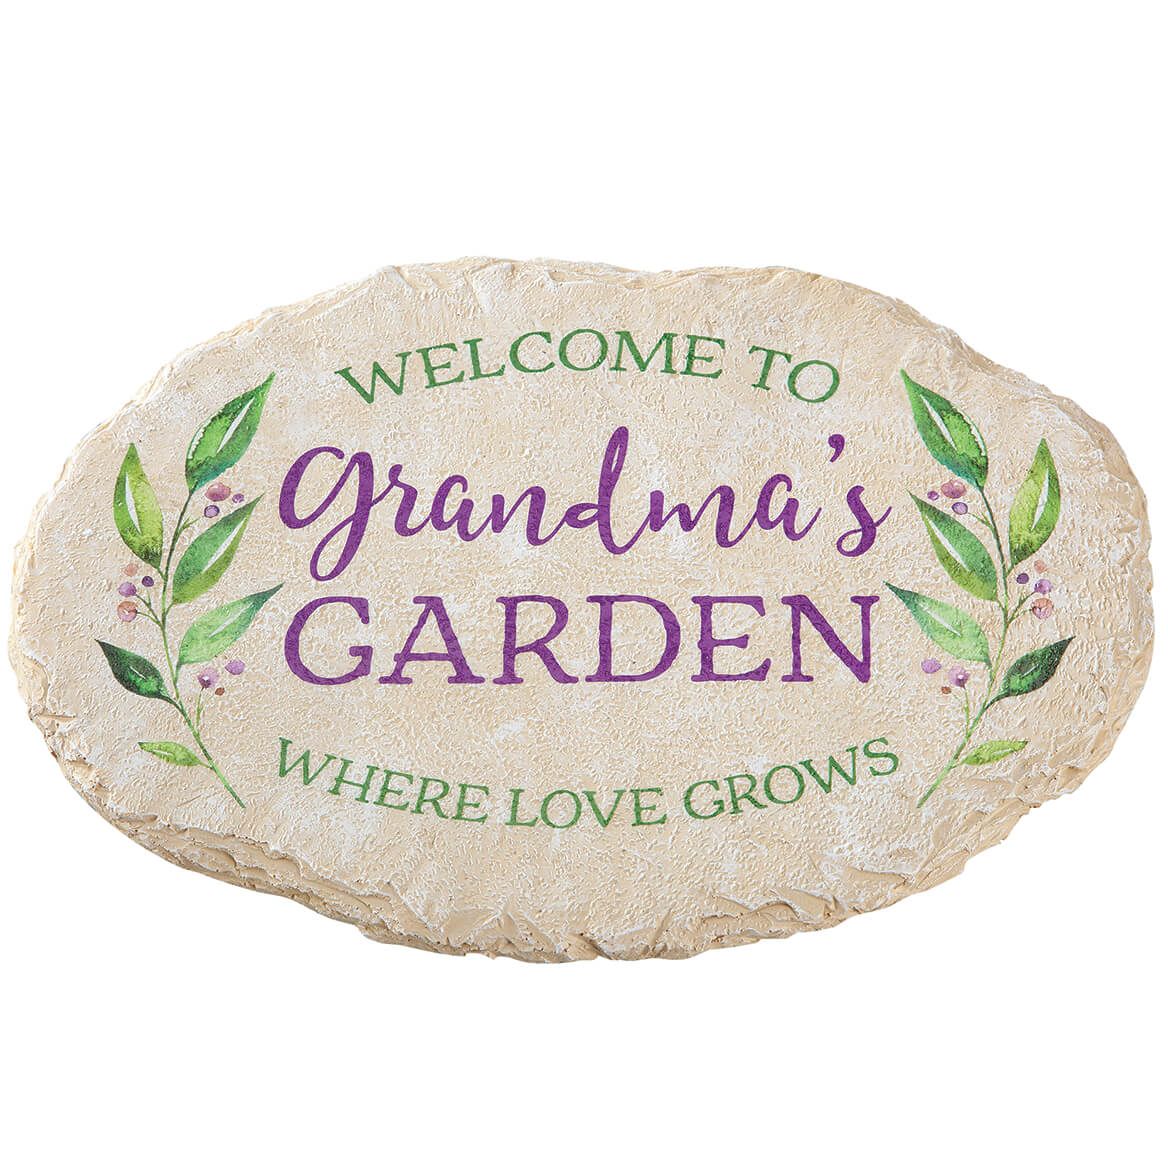 Personalized Oval-Shaped Where Love Grows Garden Stone + '-' + 374559